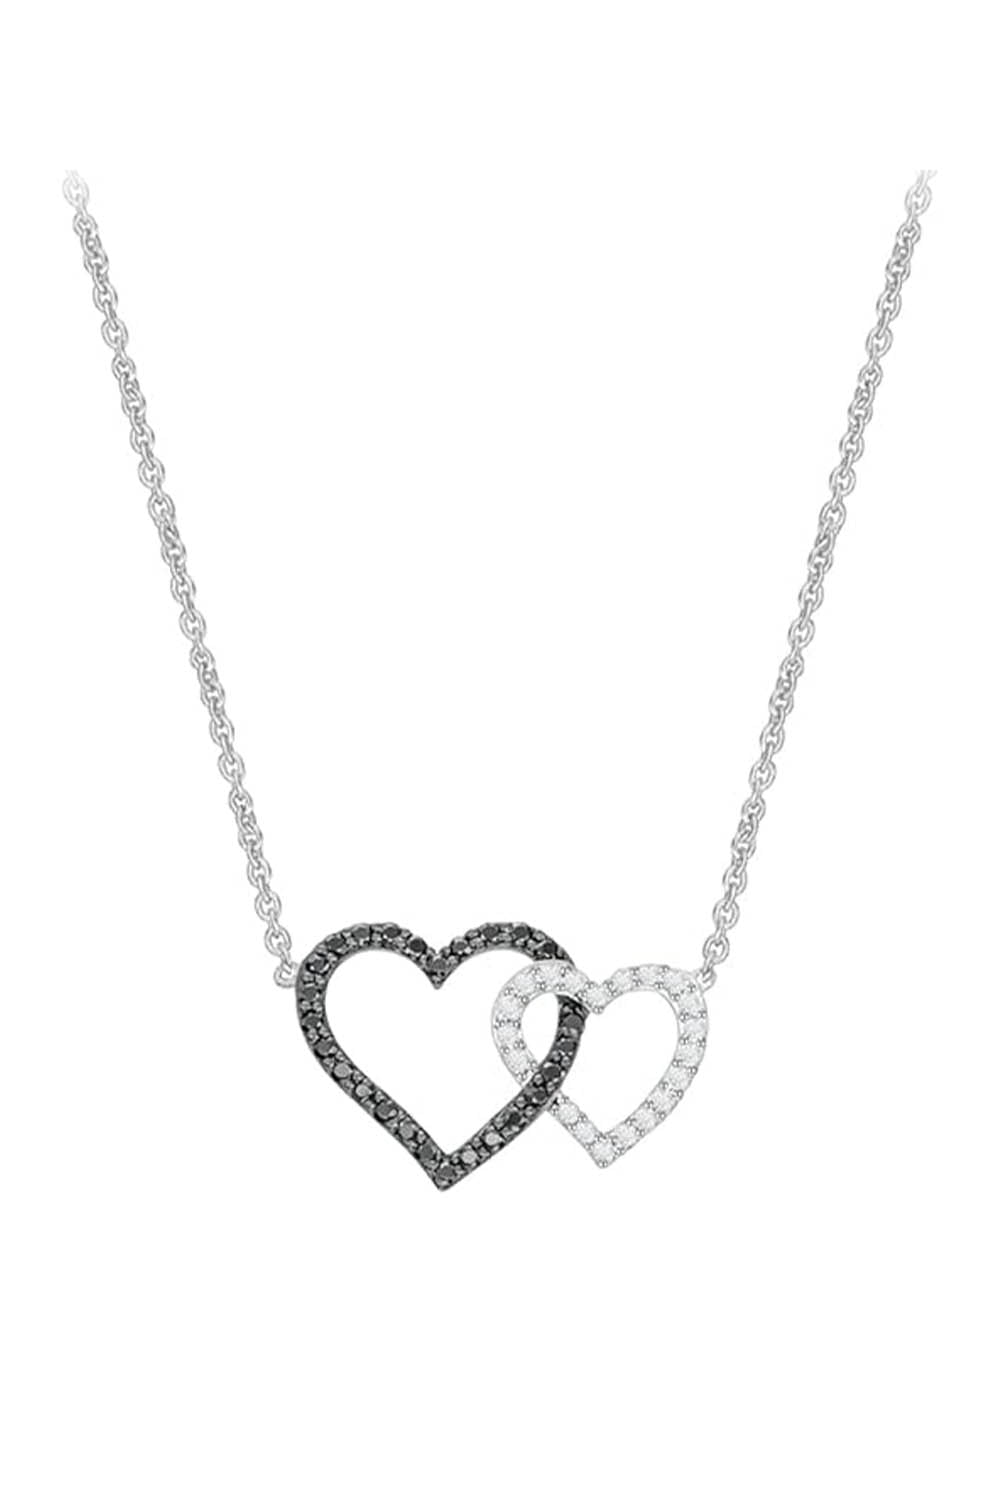 White Gold Color Black and White Interlocking Heart Necklace